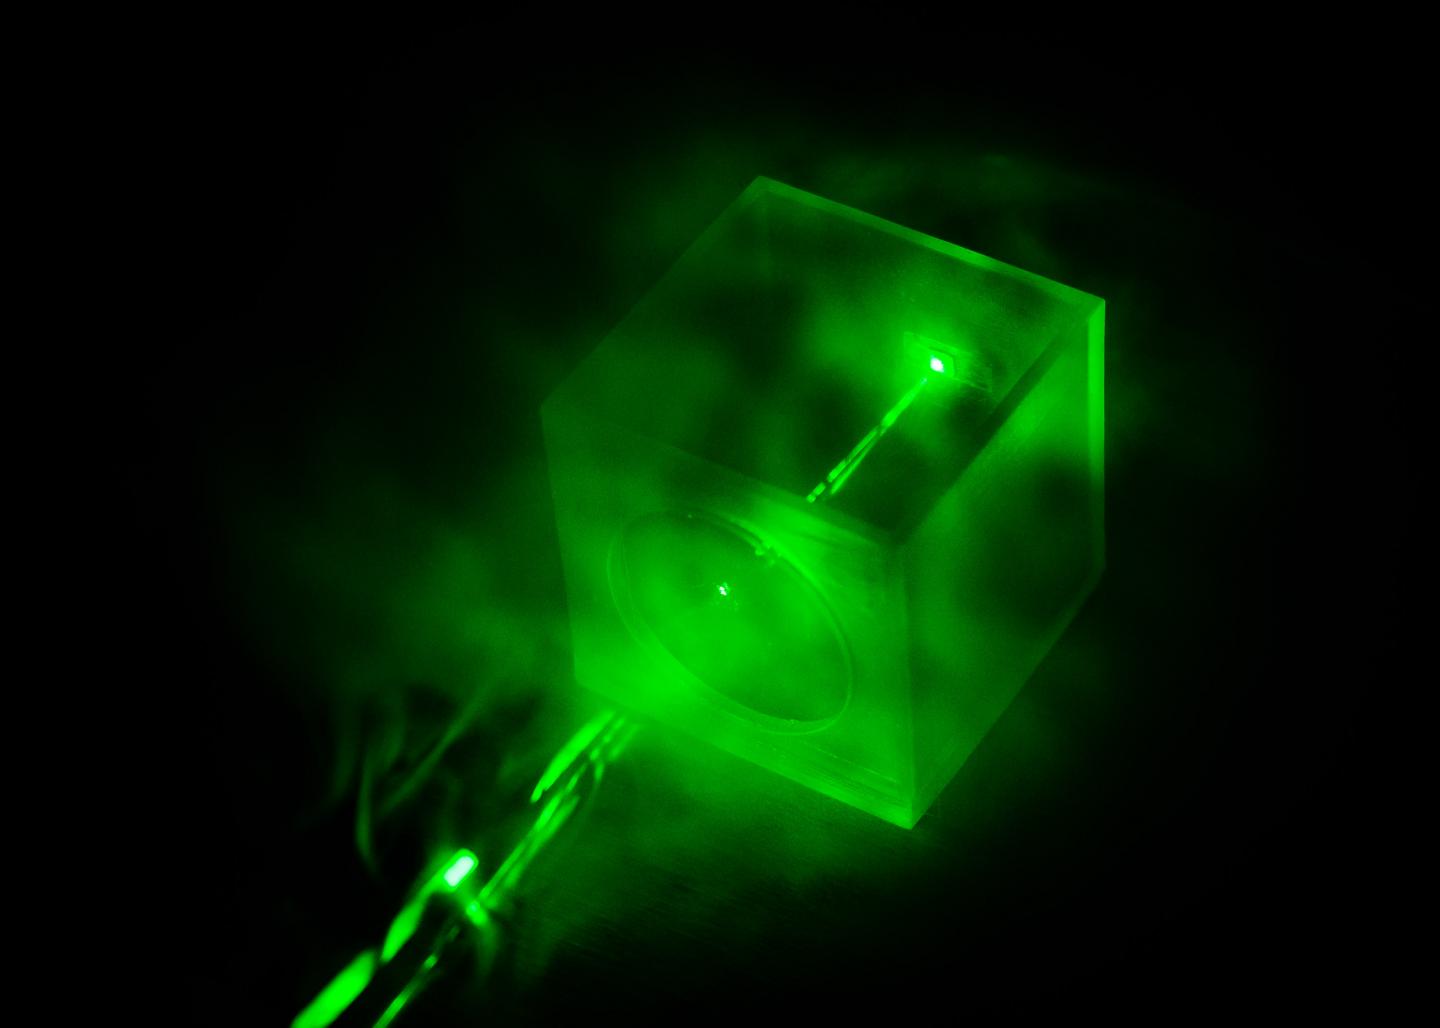 A Laser Shining on the Special Chip Designed by the NTU Researchers